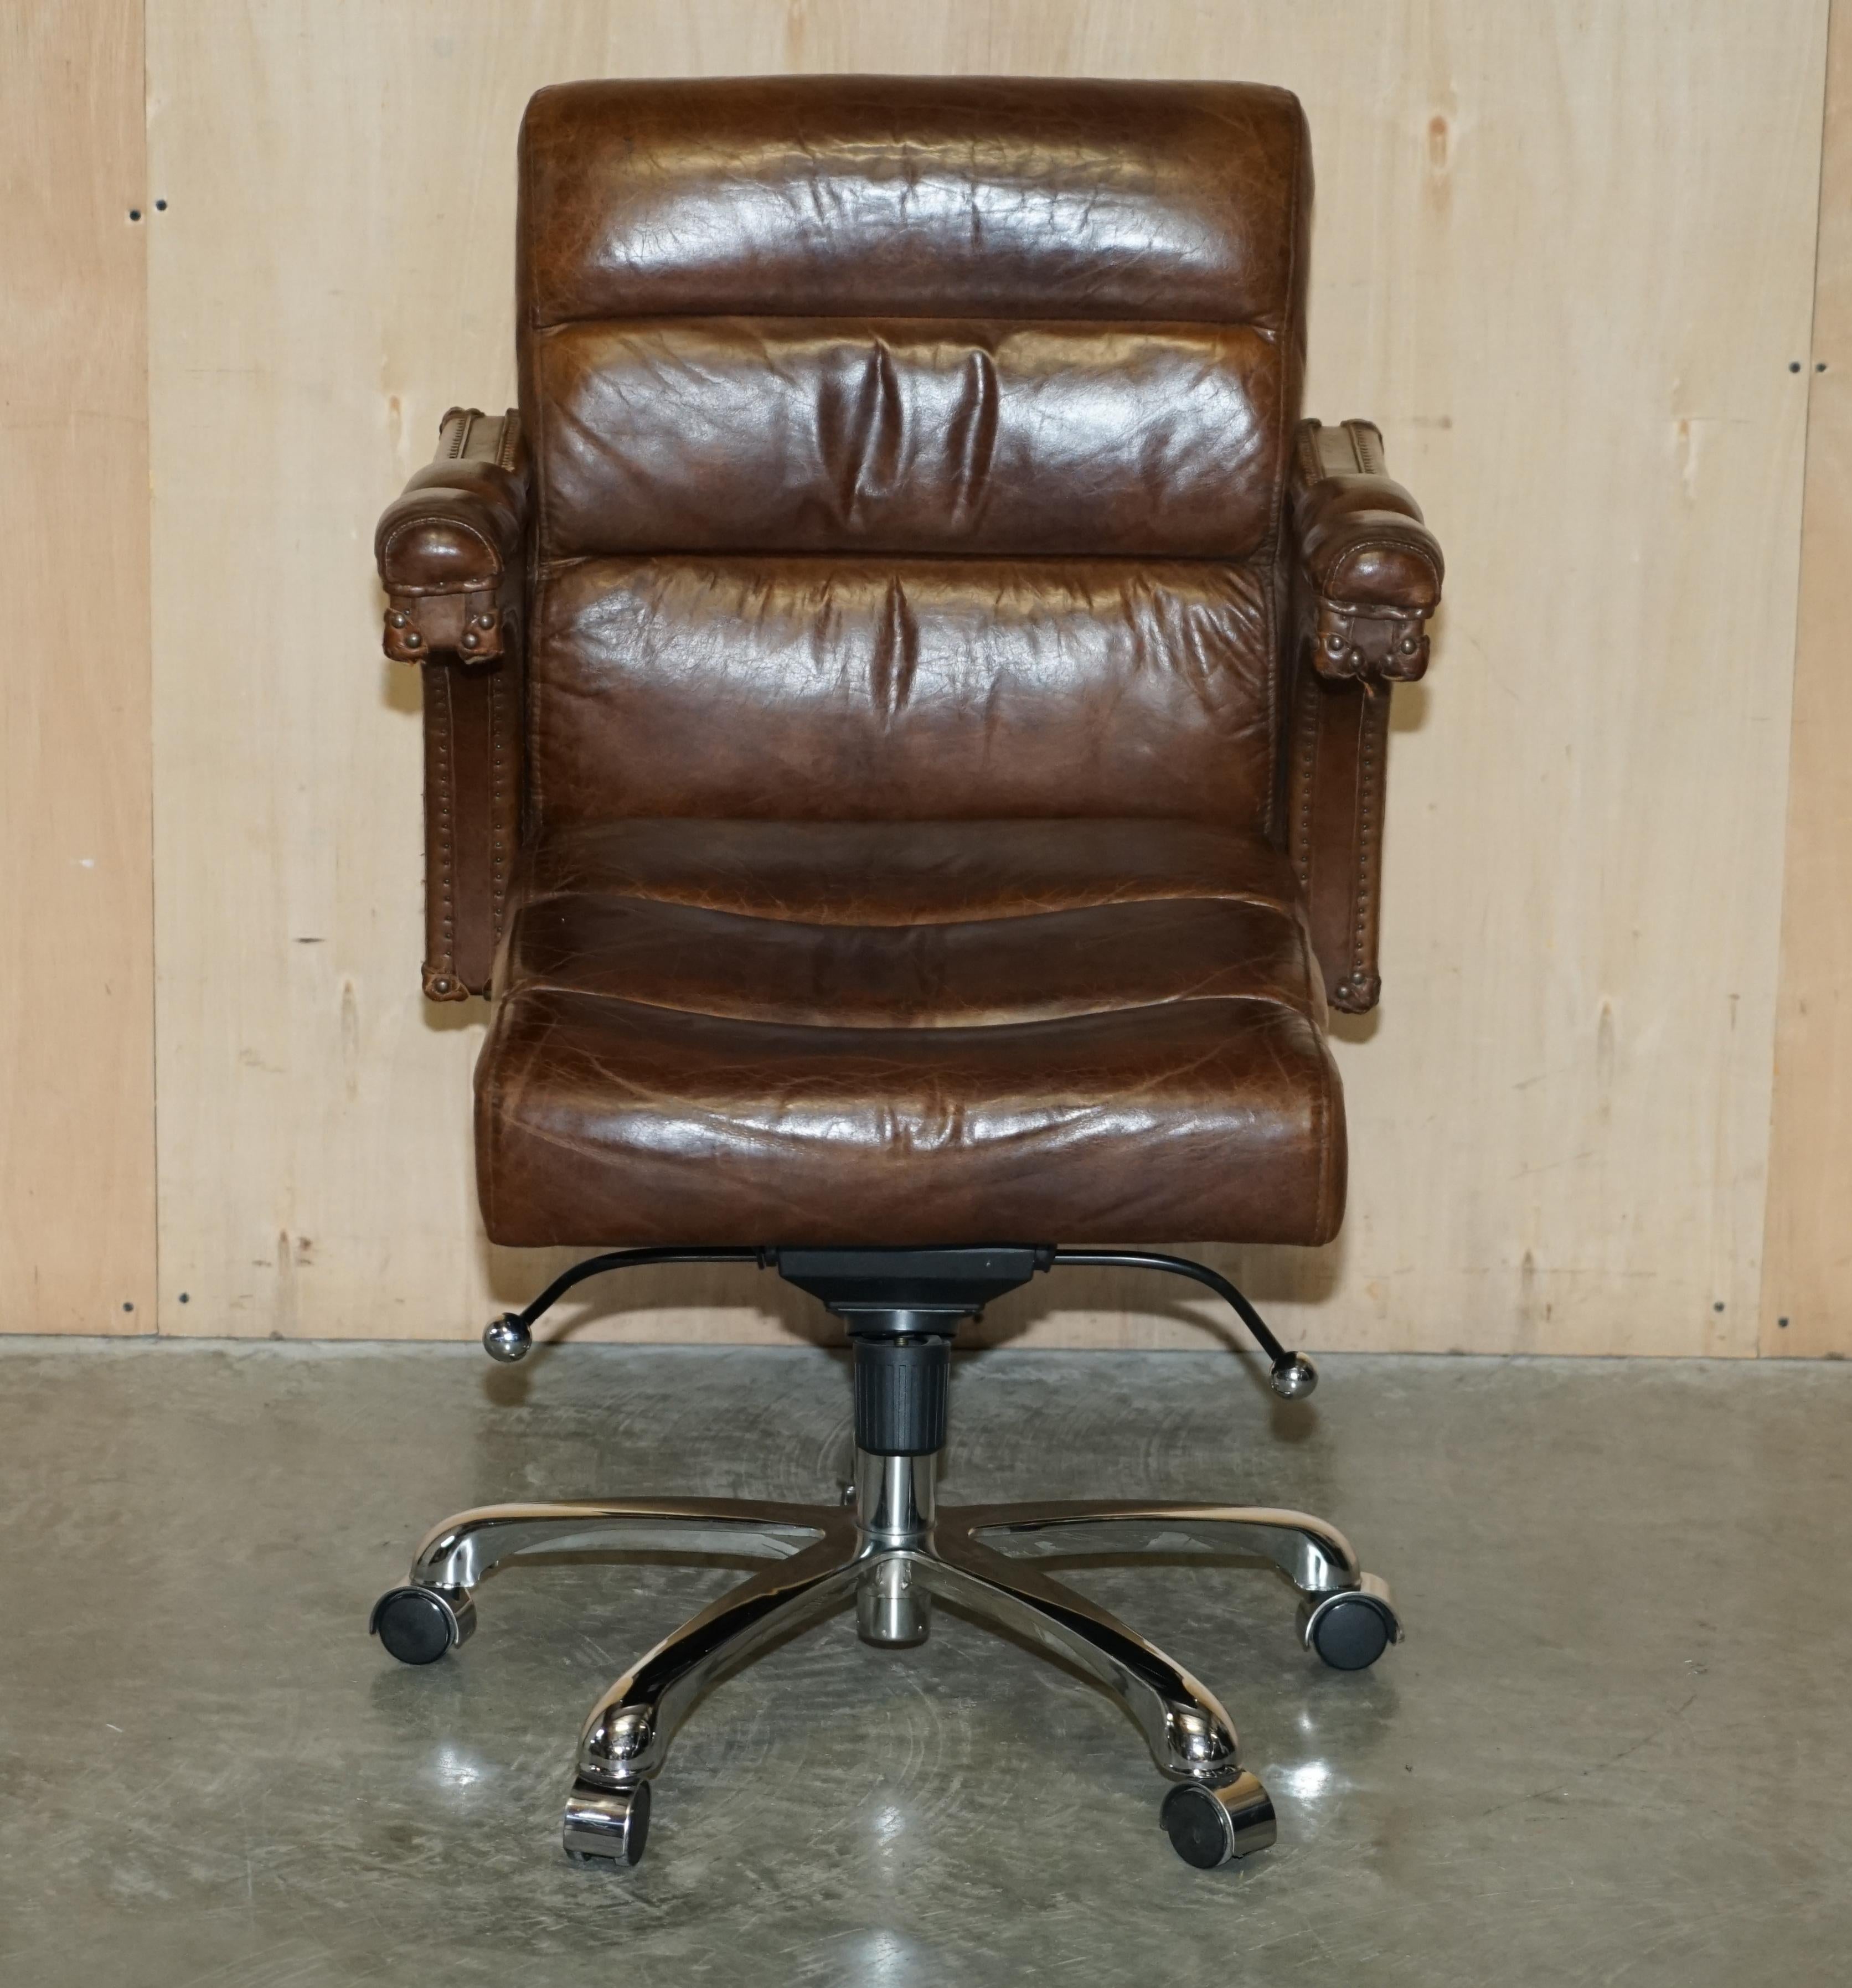 We are delighted to offer for sale this very comfortable, saddle brown heritage leather office chair made by Halo

Please note the delivery fee listed is just a guide, it covers within the M25 only for the UK and local Europe only for